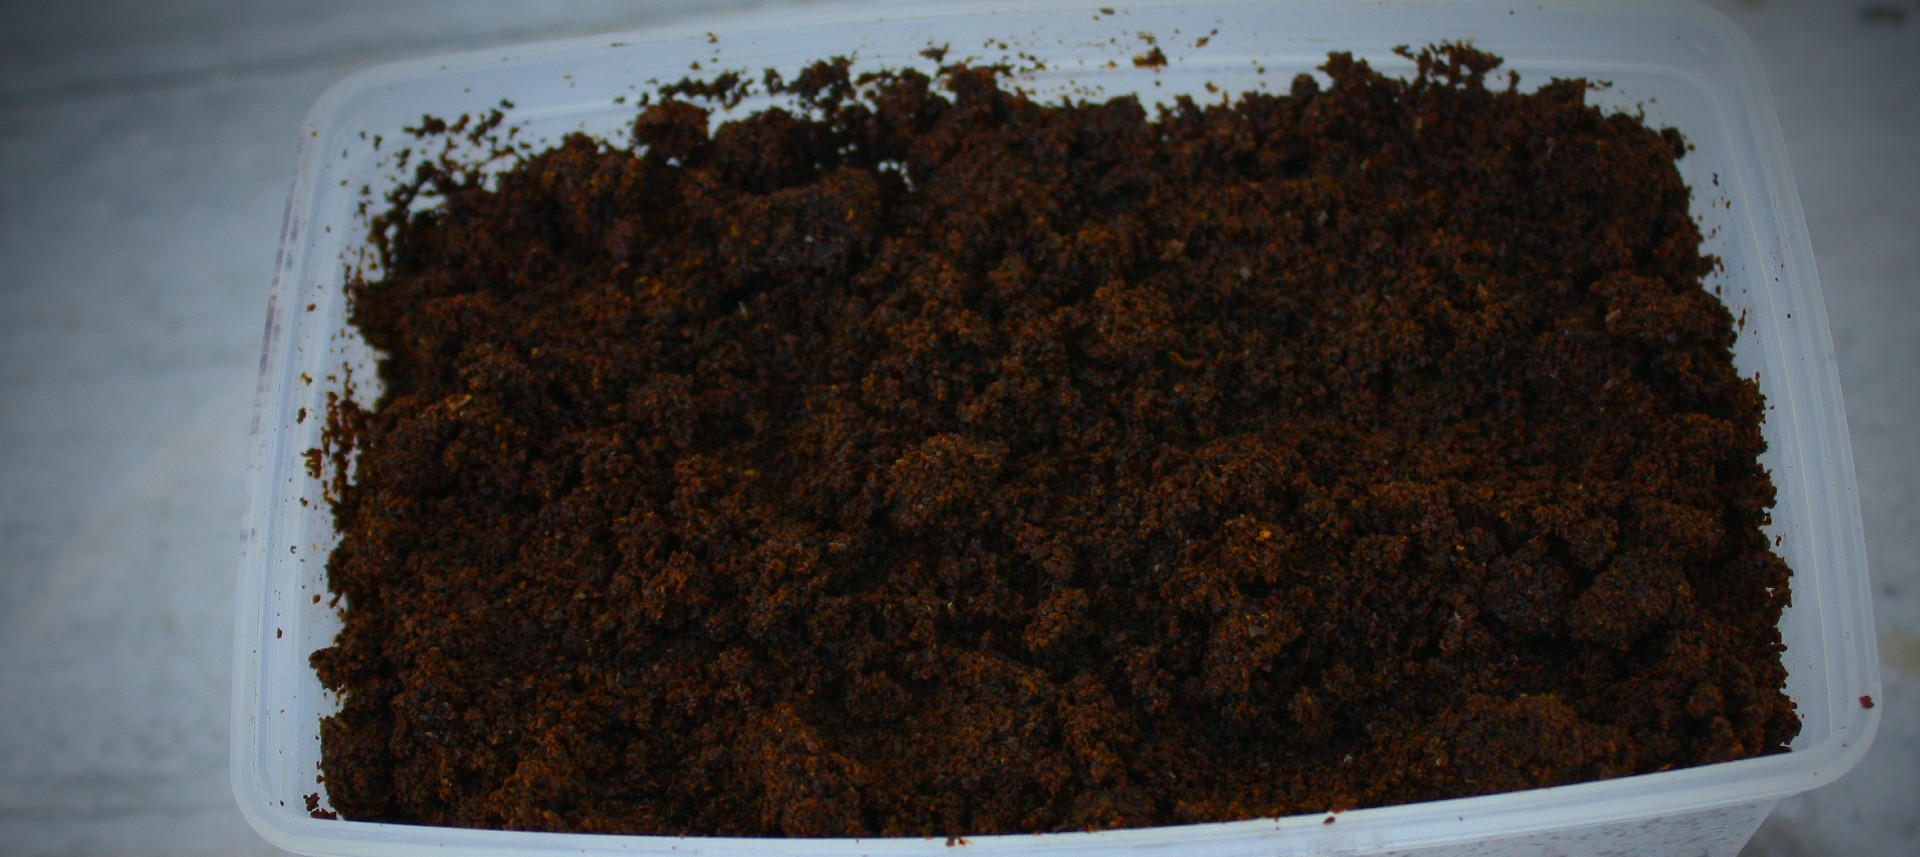 Composting Coffee Grounds